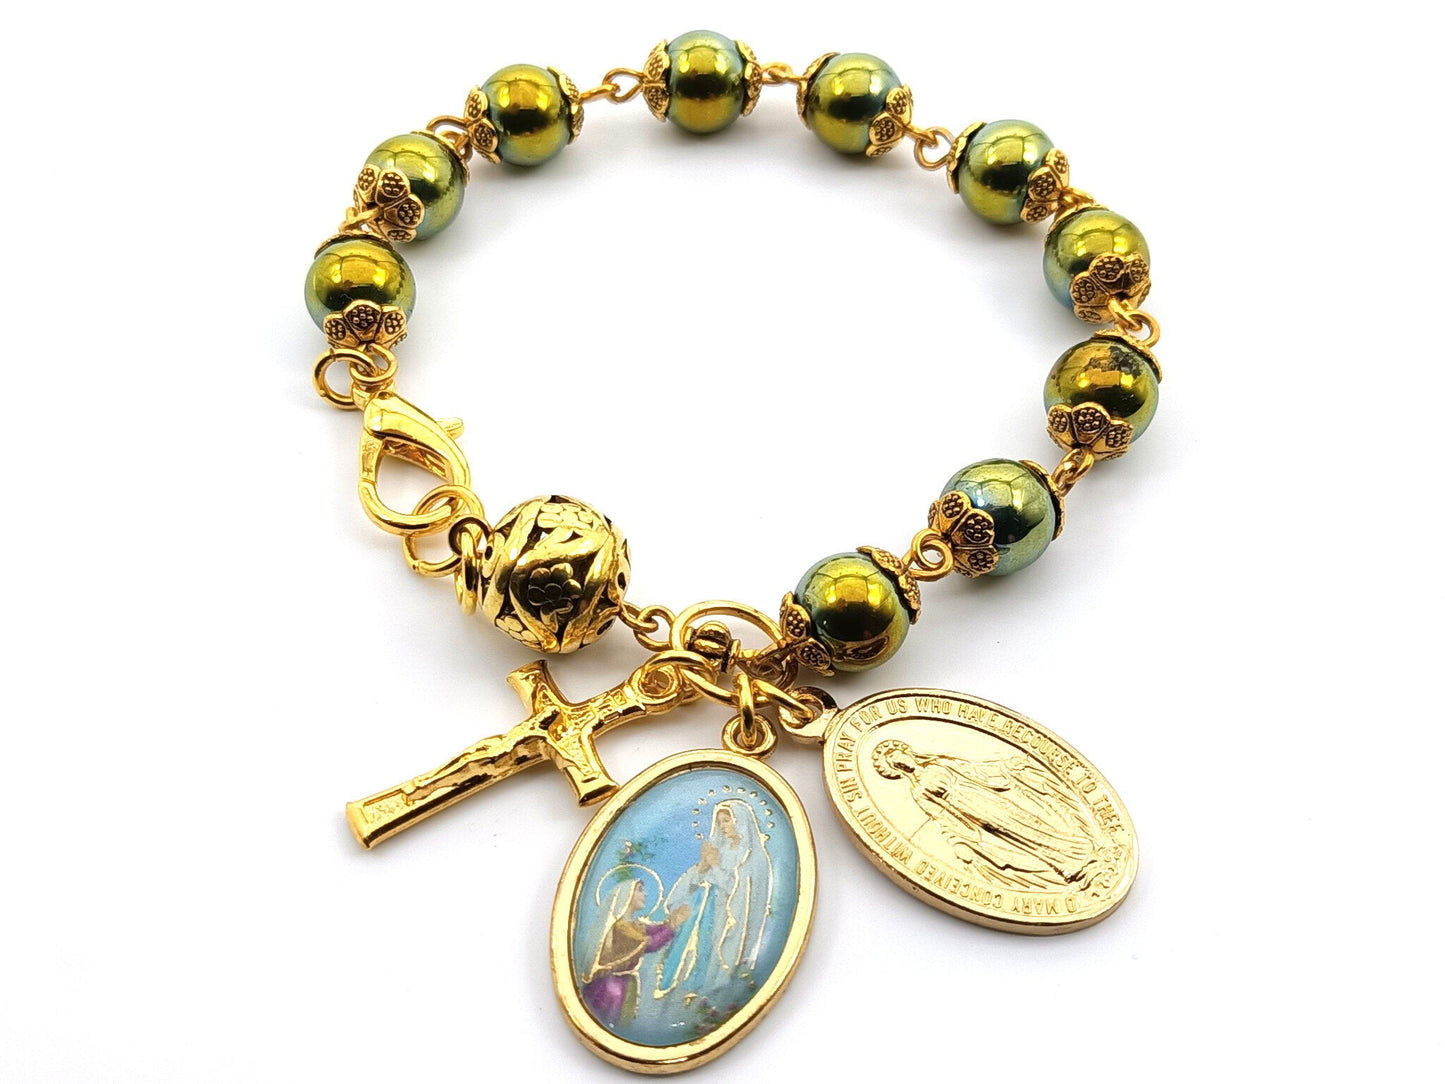 Our Lady of Lourdes unique rosary beads single decade bracelet with green hematite and gold beads, crucifix, picture medal and miraculous medal.